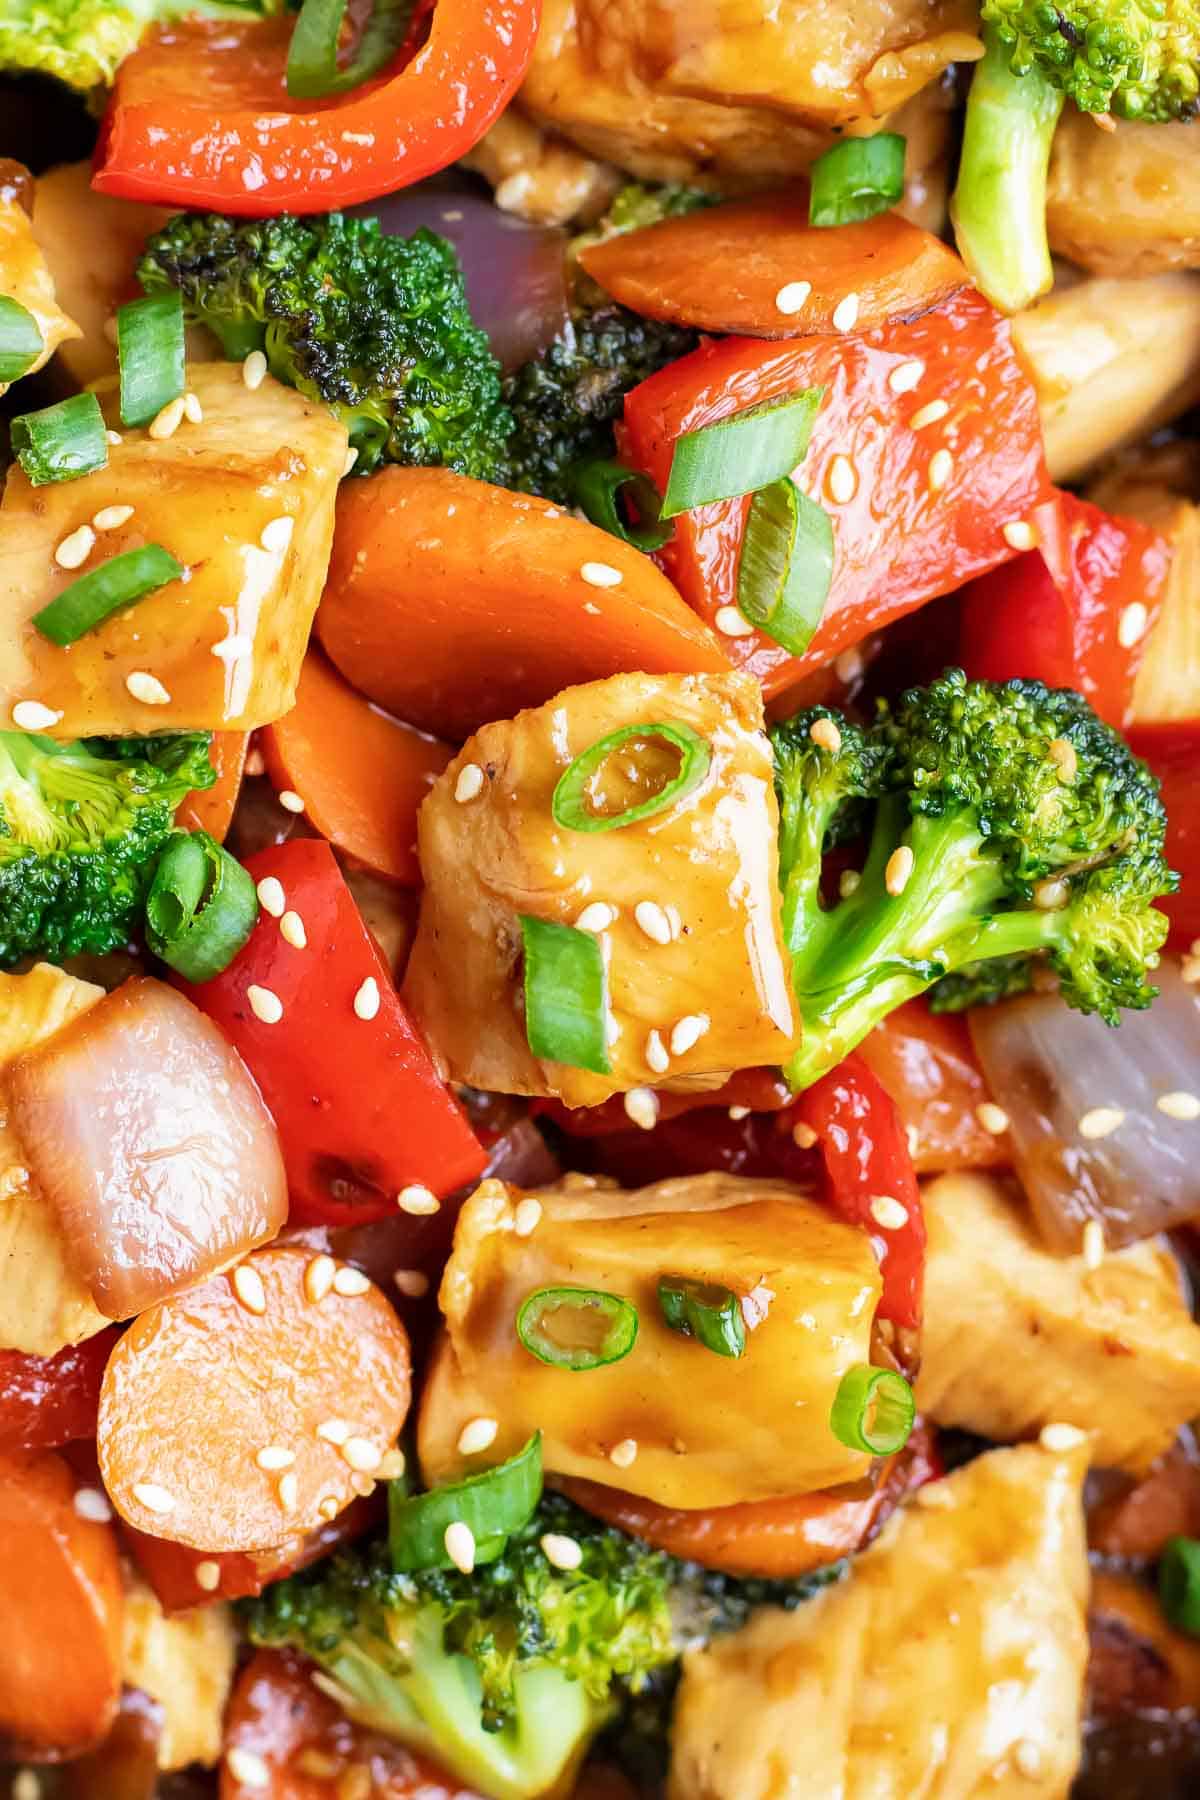 Teriyaki chicken stir-fry with red bell pepper, carrots, broccoli, and red onion.